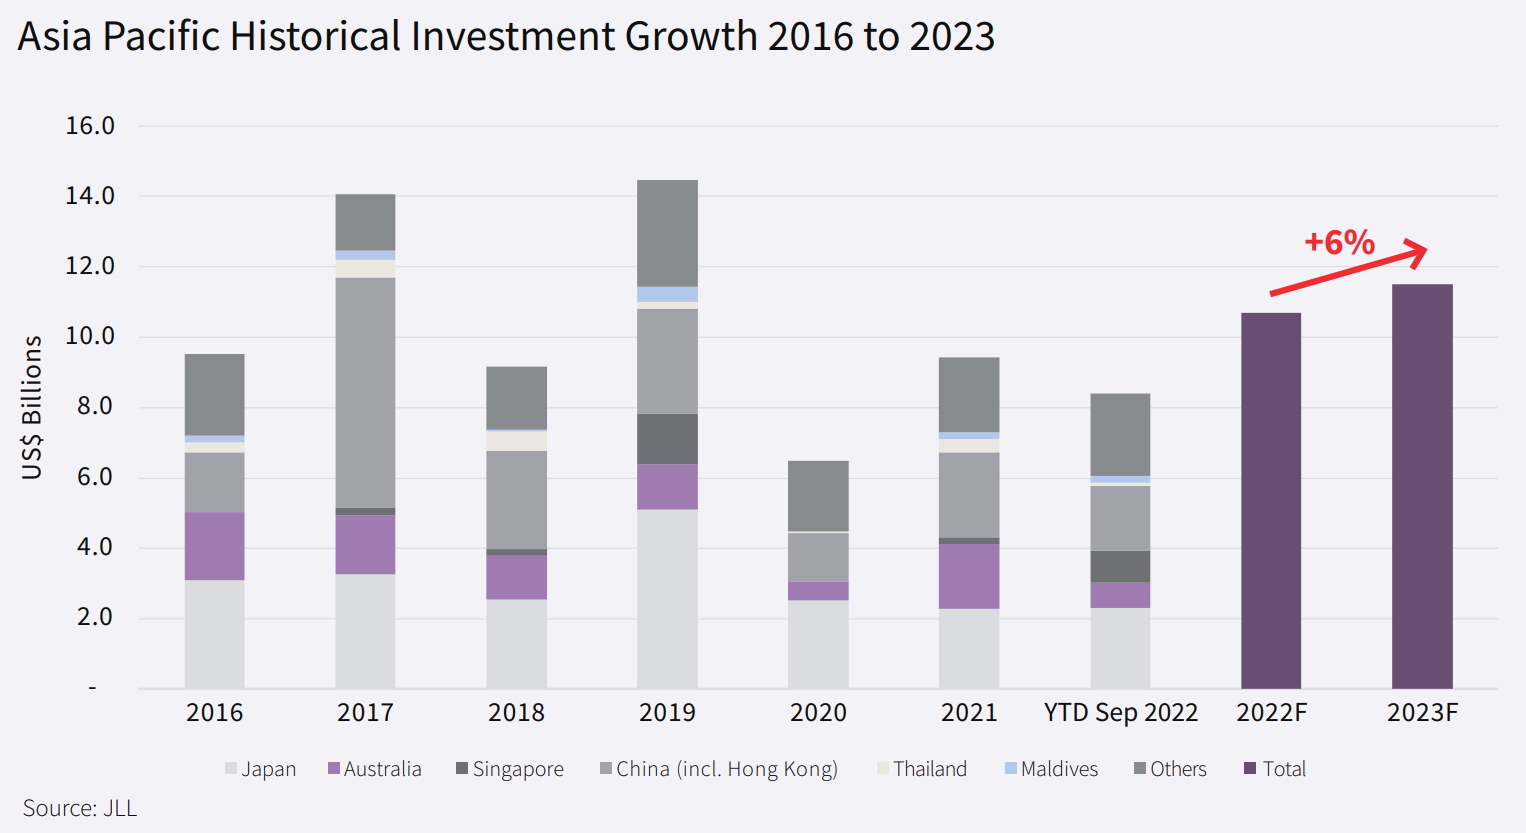 Historical Investment Growth